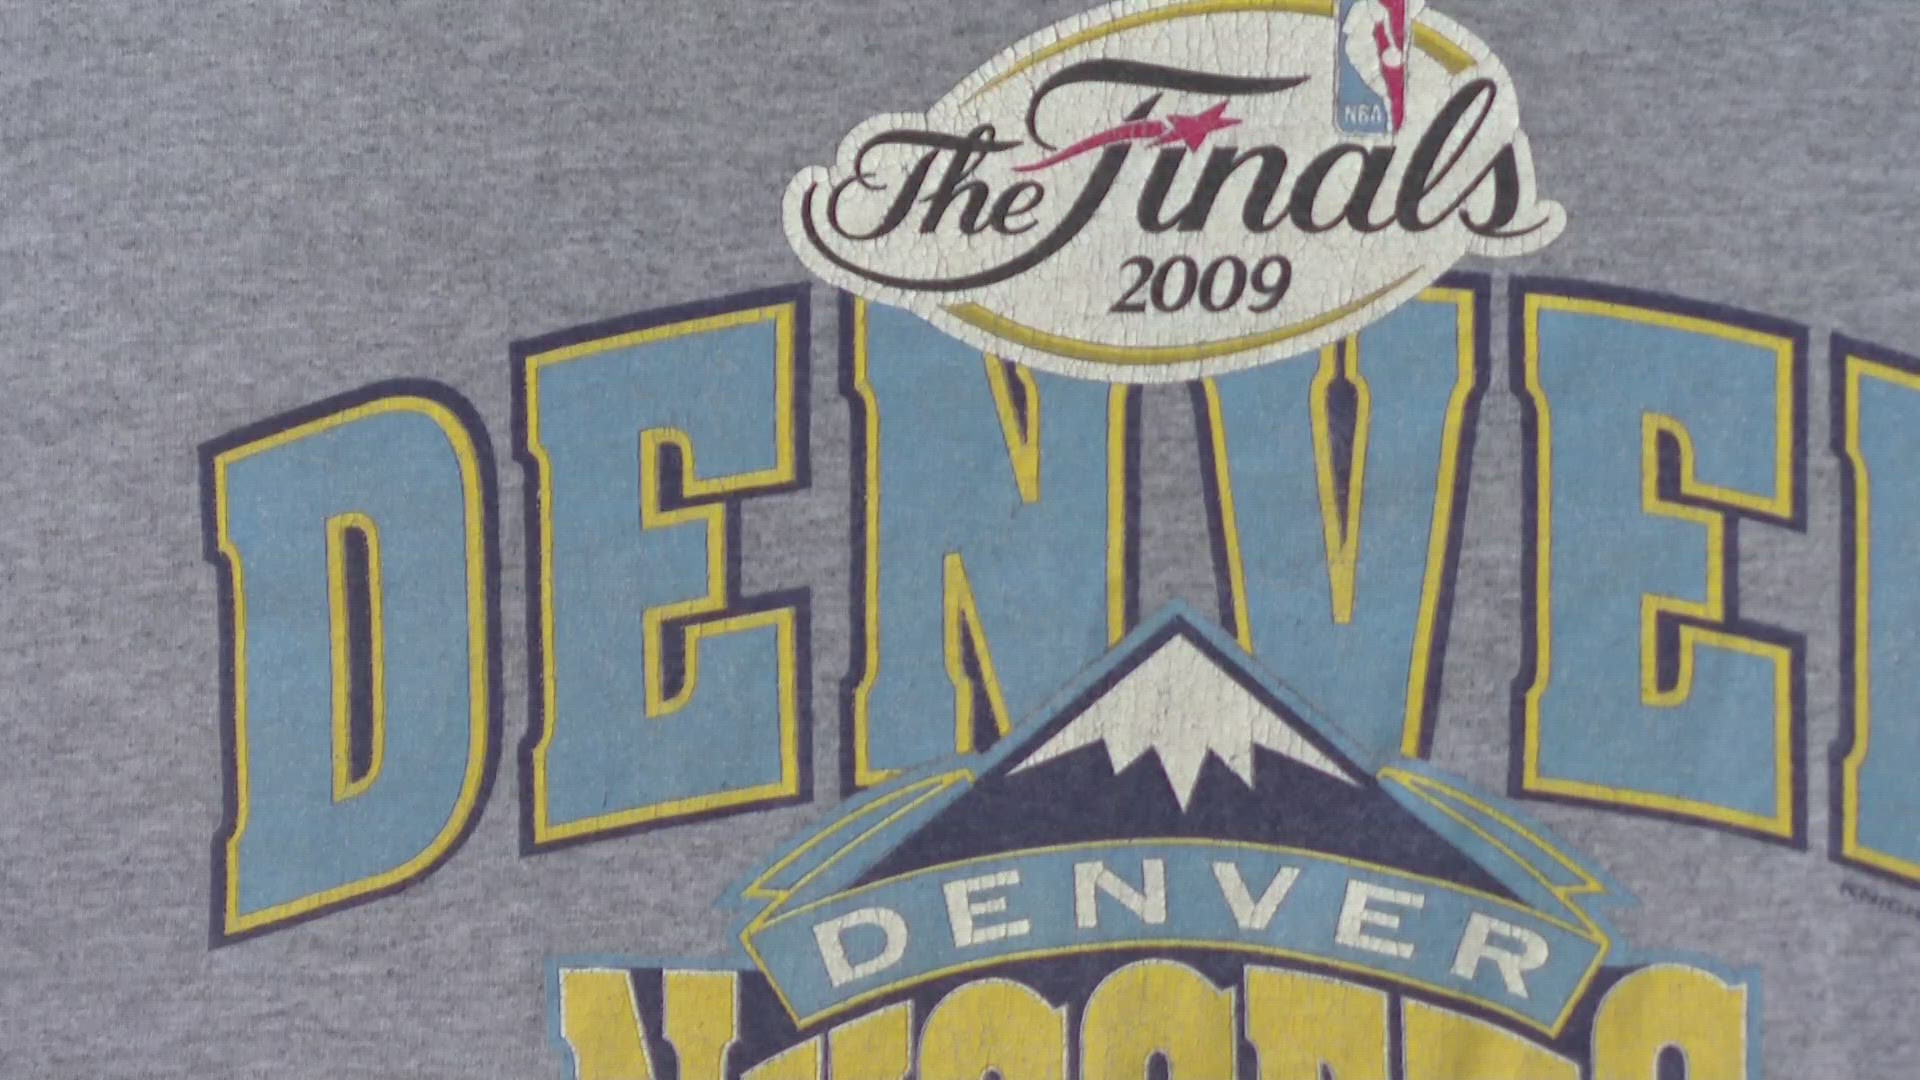 The Nuggets have come close in years past, but this is the first time fans of the team have been able to buy Finals gear... or so we thought.